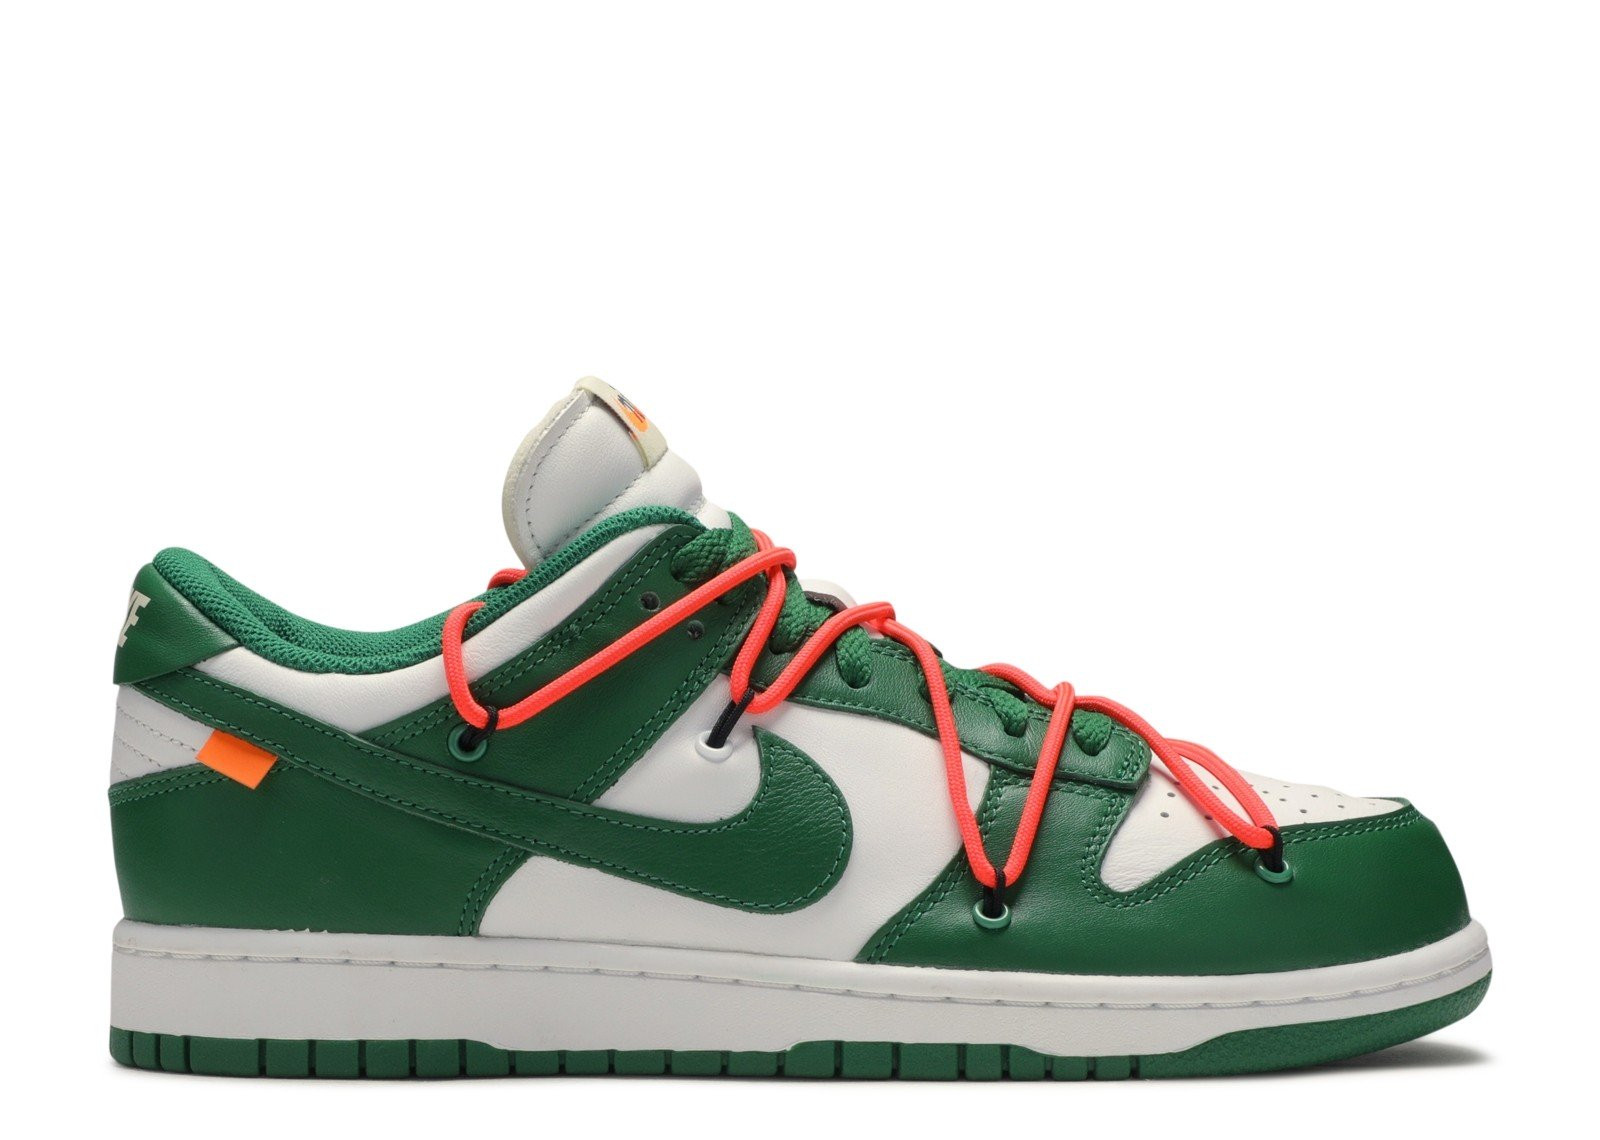 Dunk Low “Off White - Pine Green” image 1